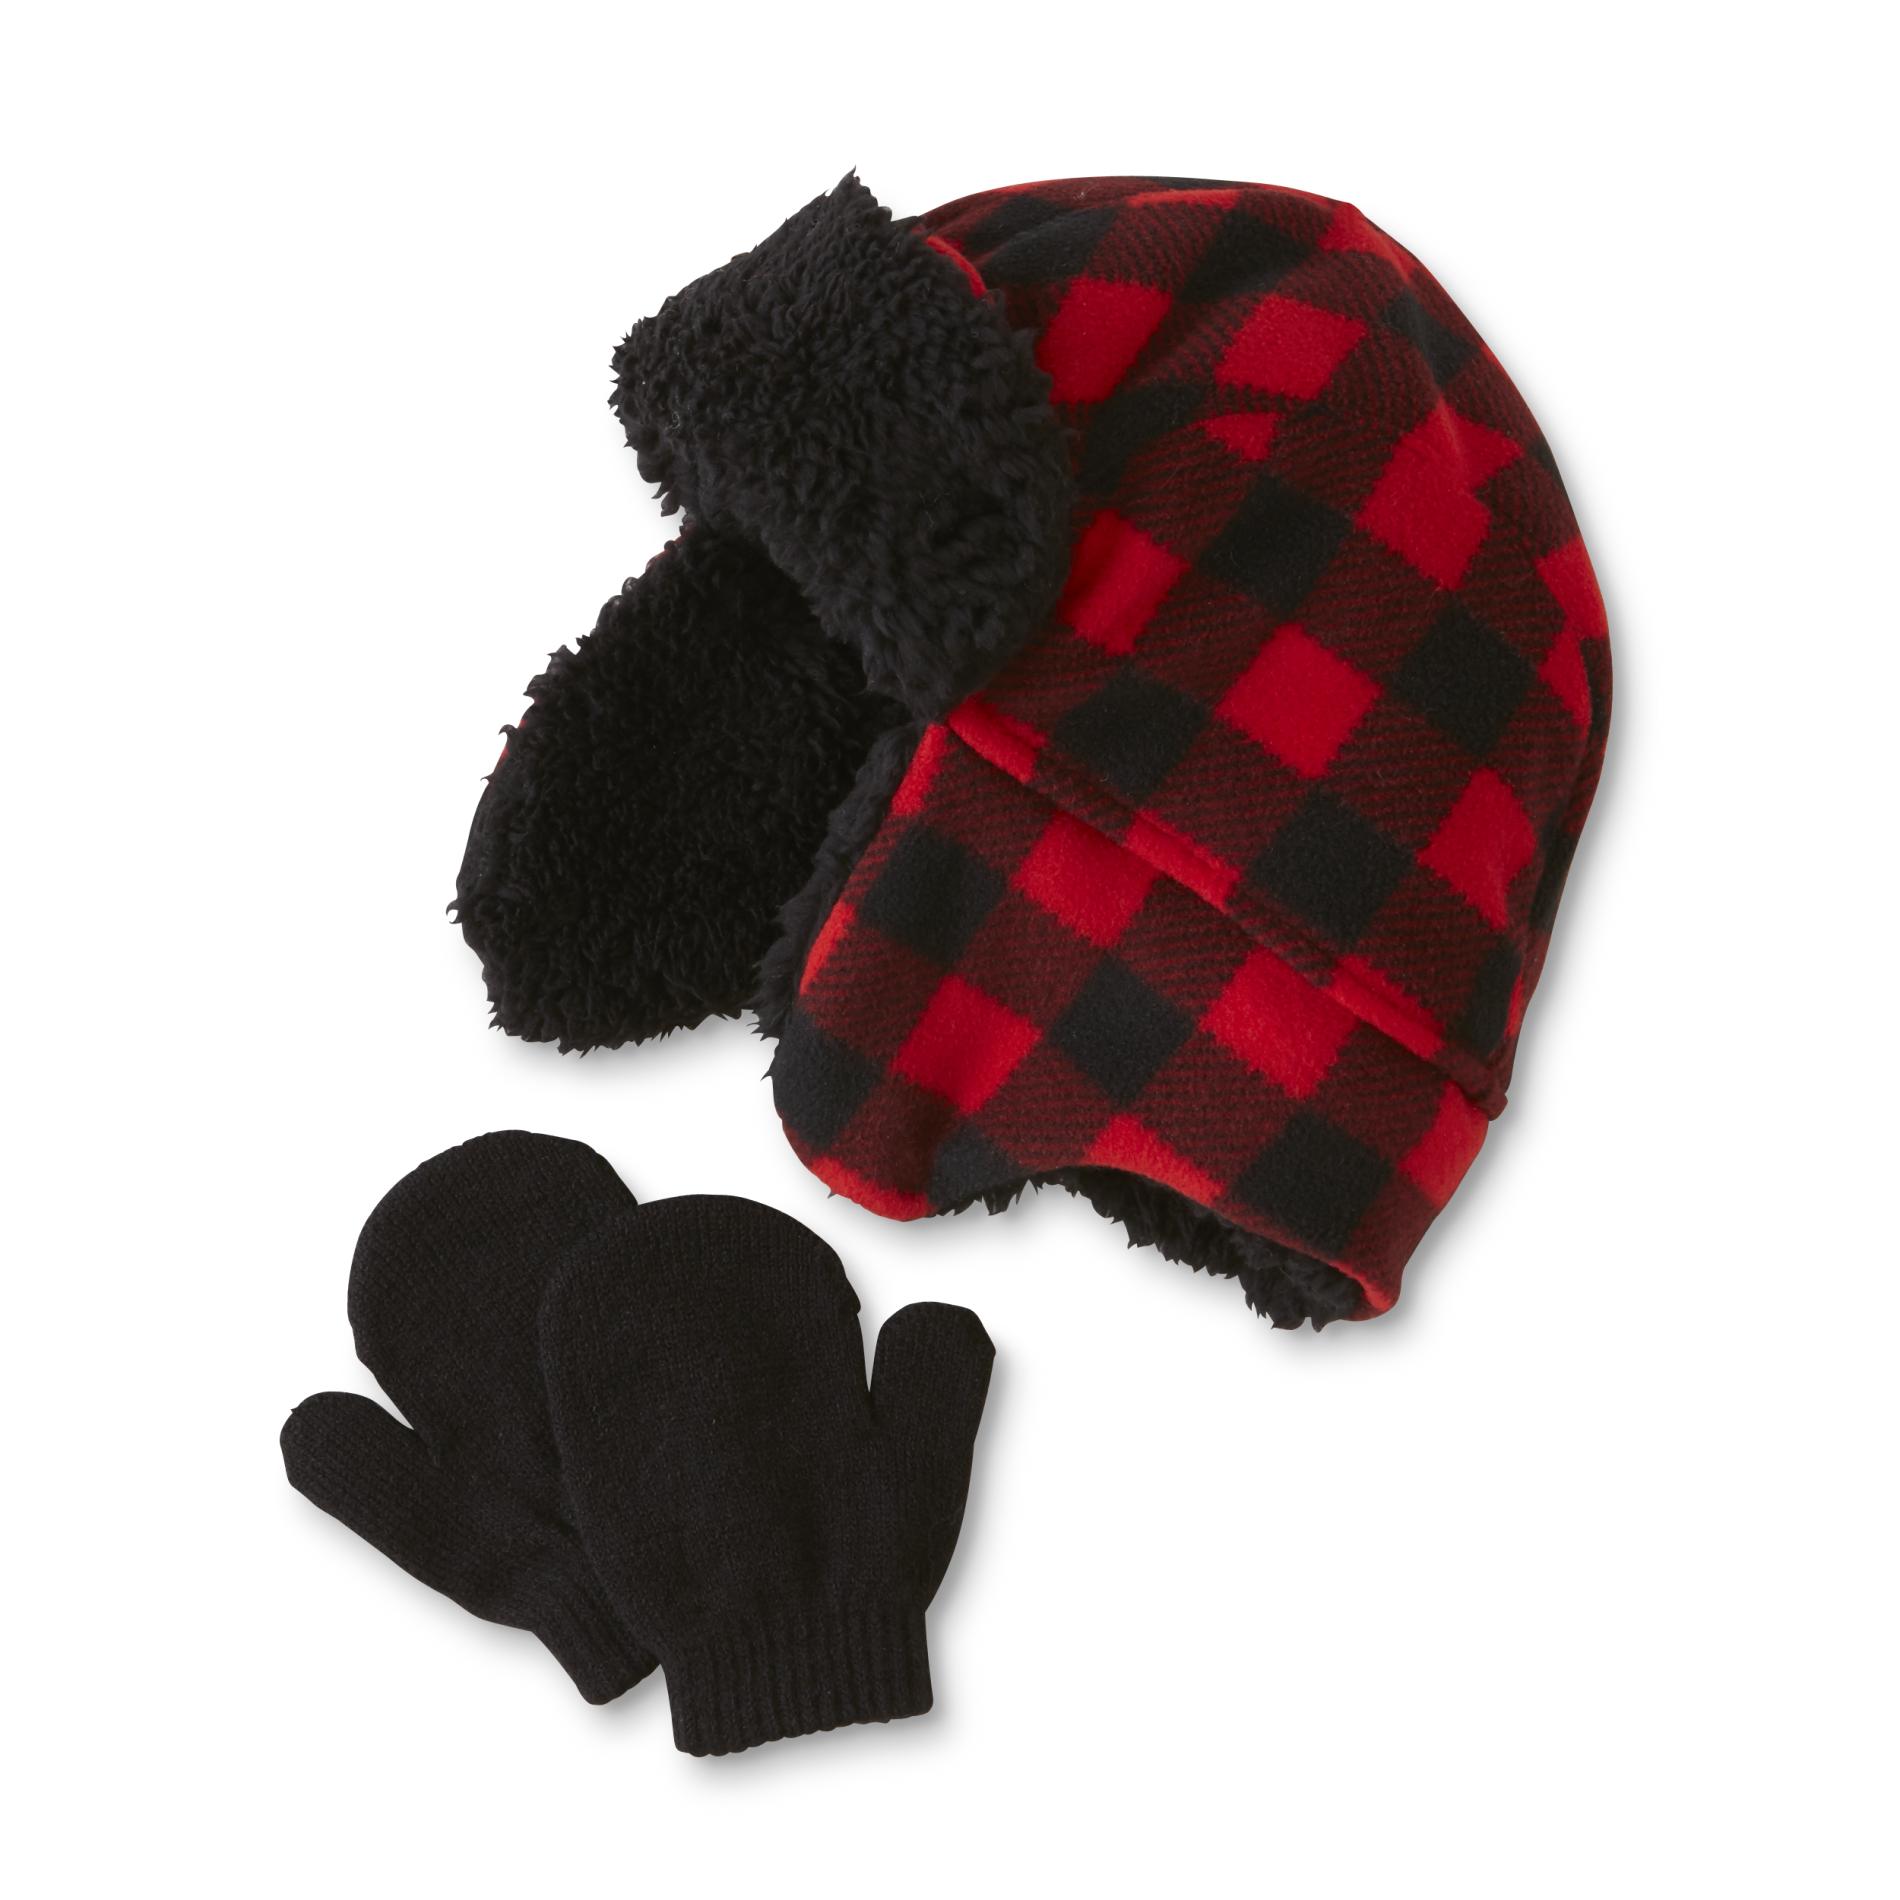 Aquarius Infant & Toddler Boys' Earflap Hat & Mittens - Checkered